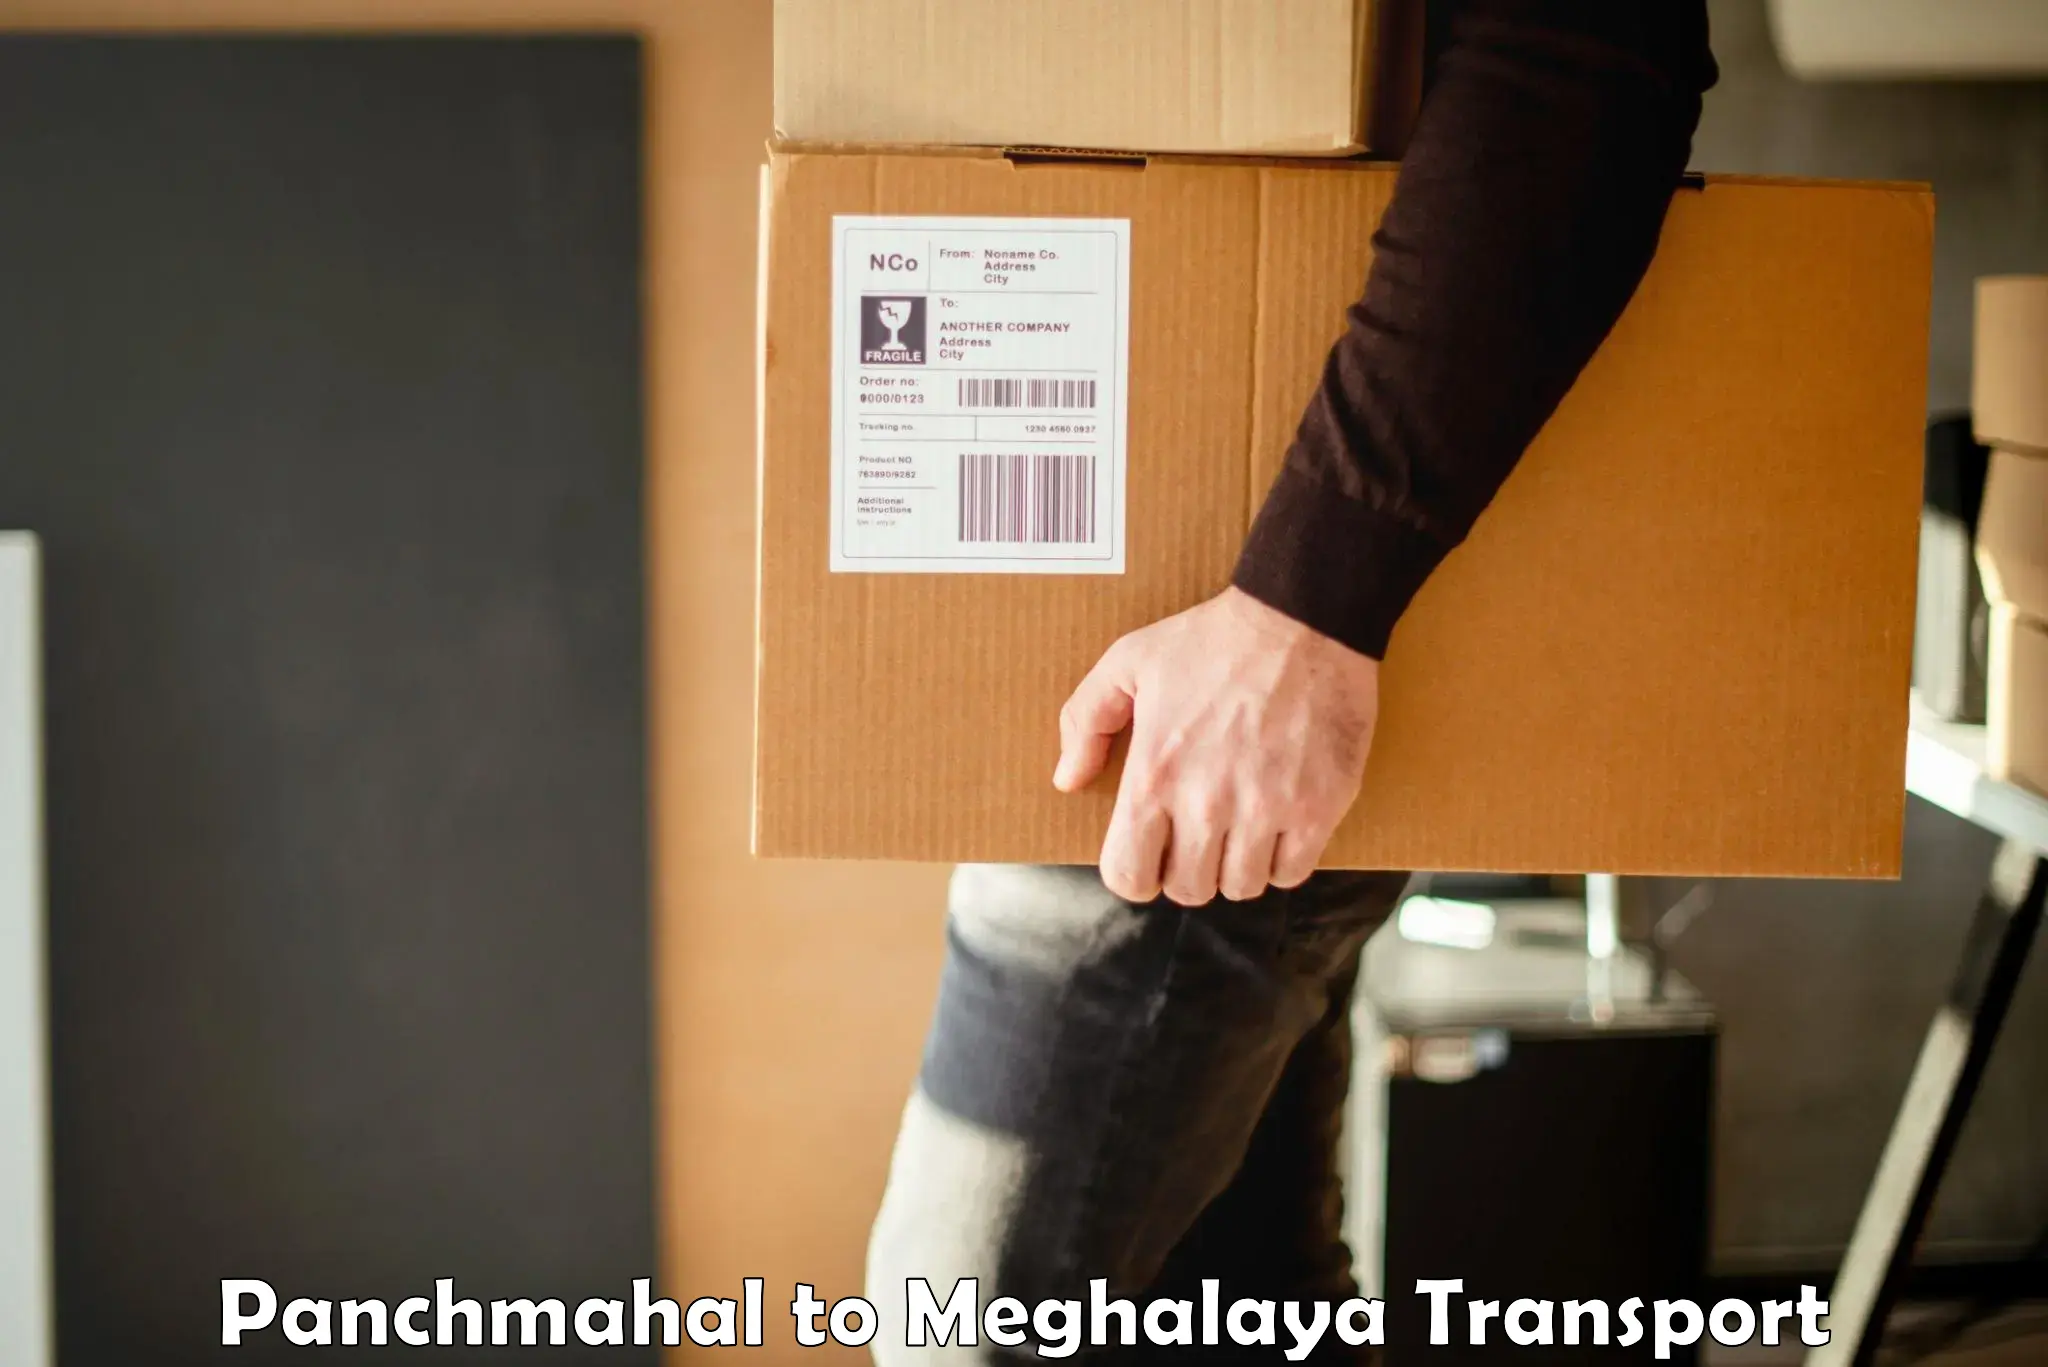 Delivery service Panchmahal to Meghalaya